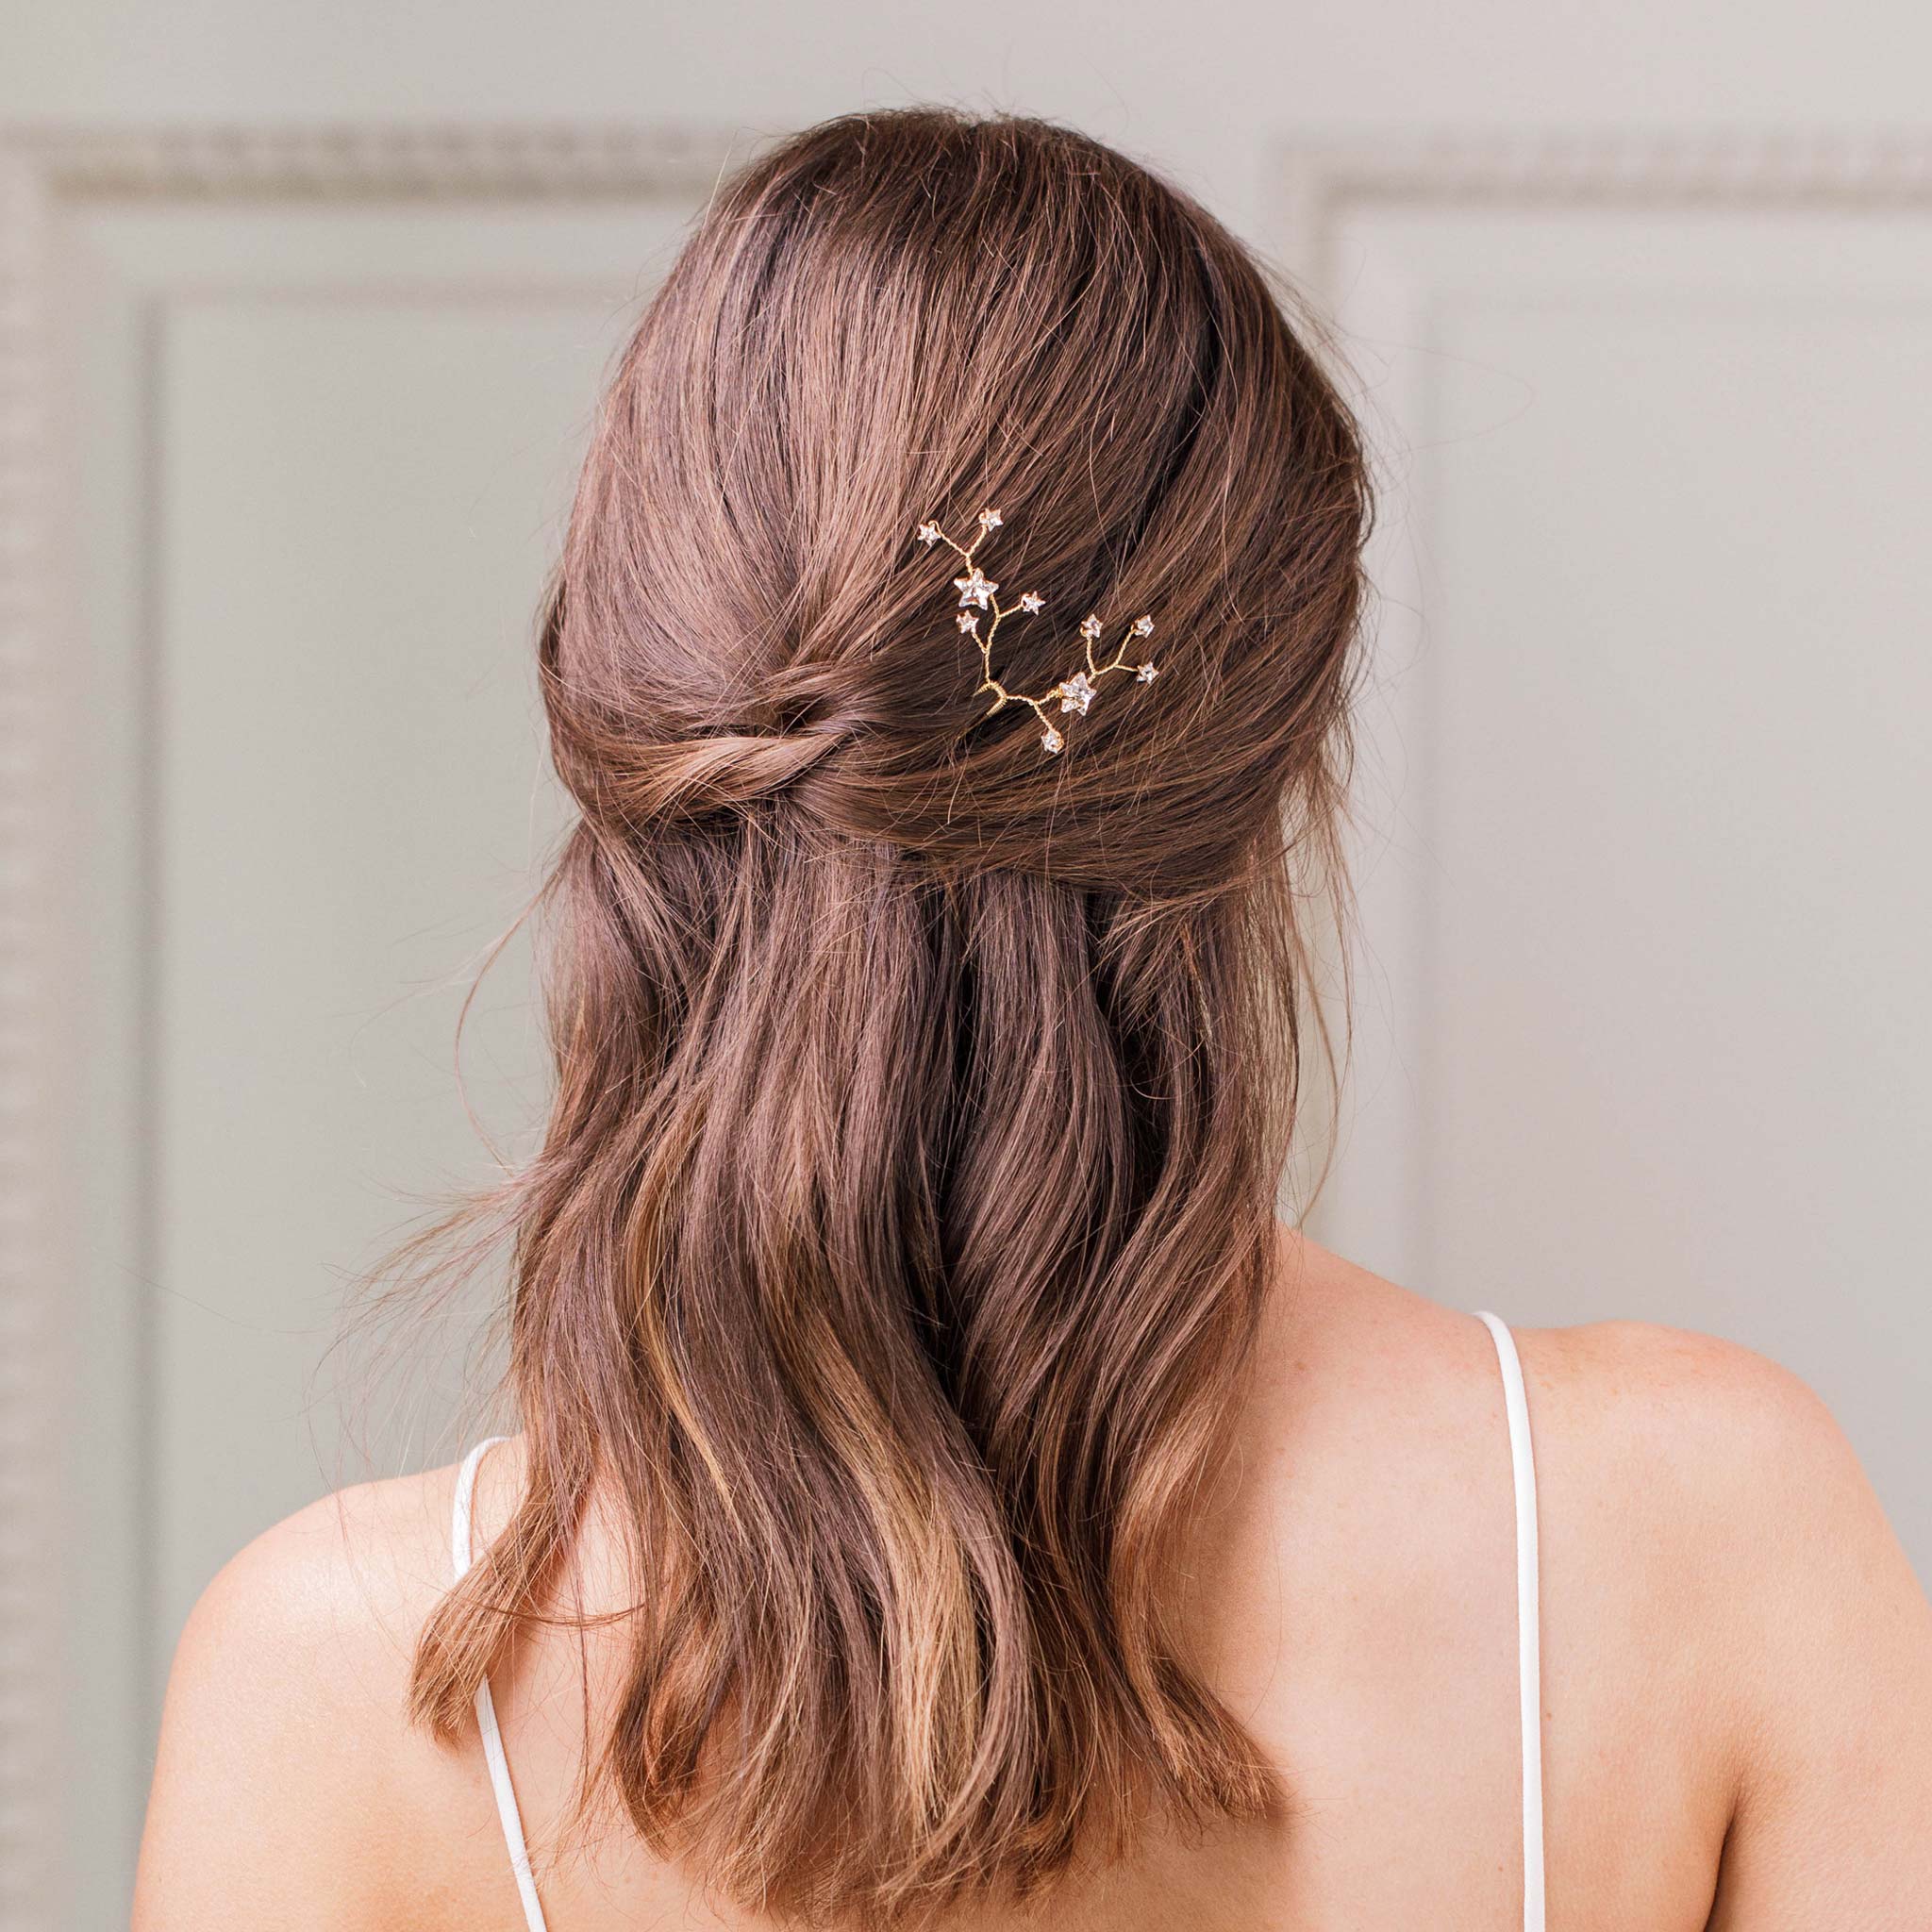 The back of a womans head with soft brown curls. In her hair there is a gold and crystal hair pin